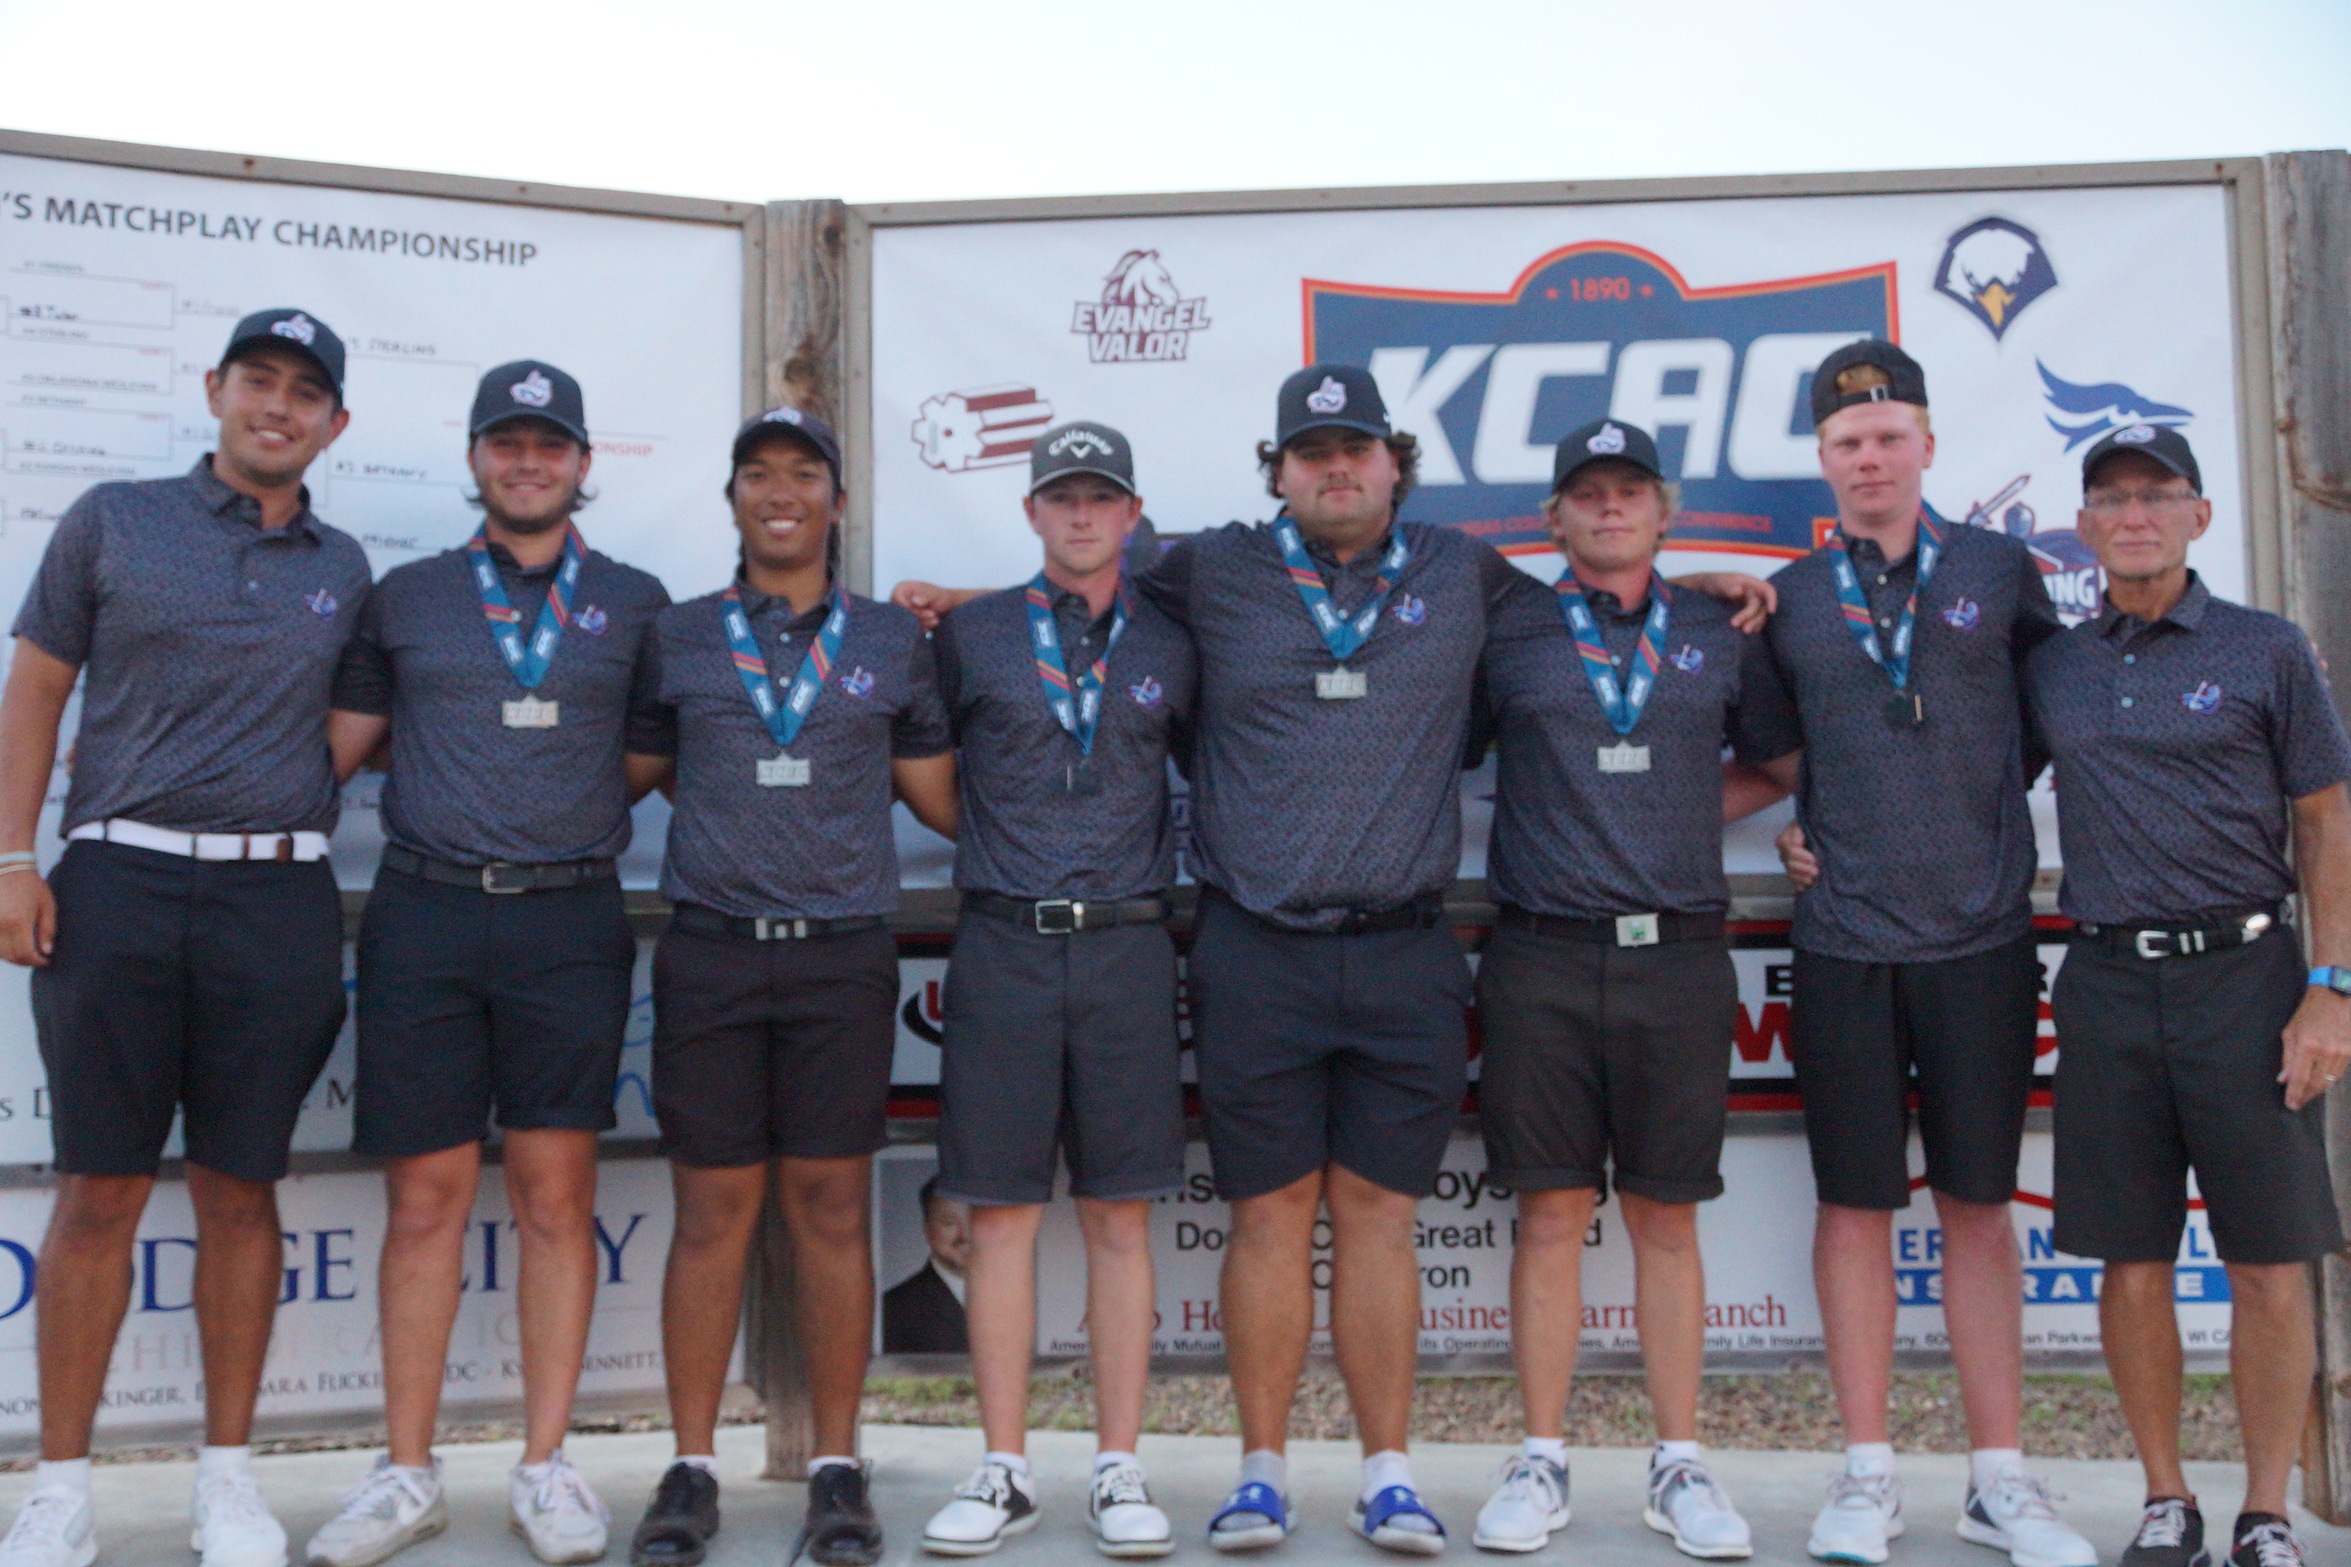 Men’s Golf Finishes as Runner-Up at KCAC Match Play Championship